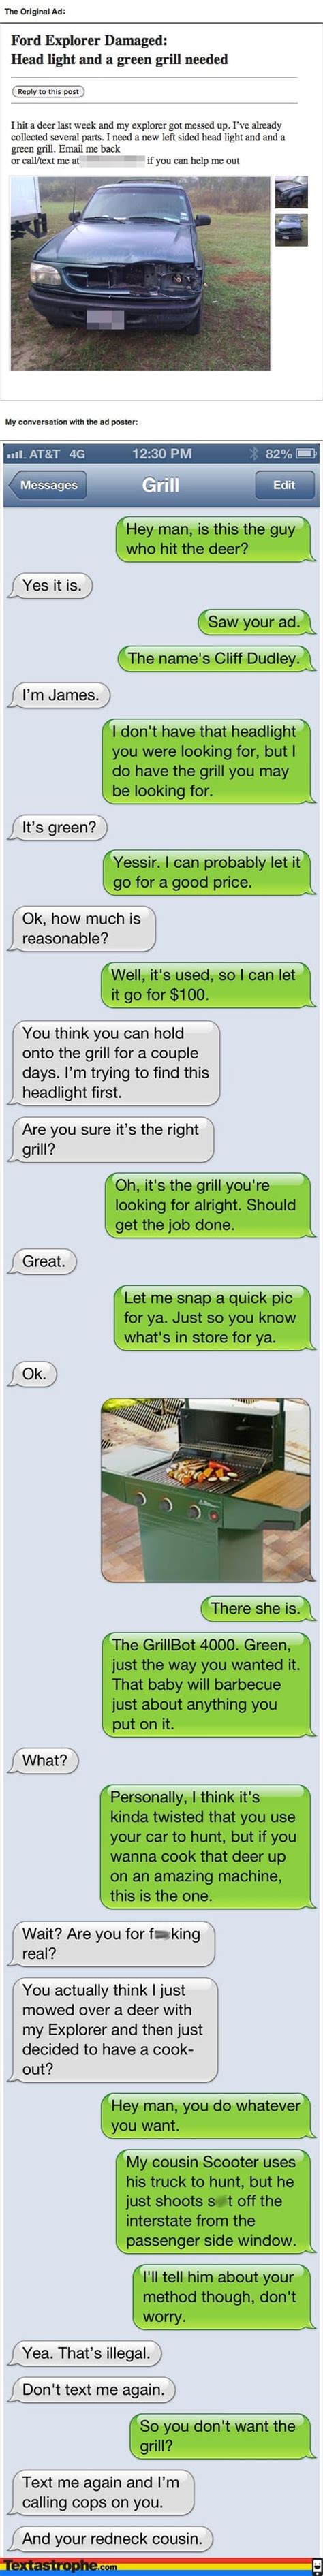 10 Interestingly Playful Text Message Pranks Ever Have Been Sent